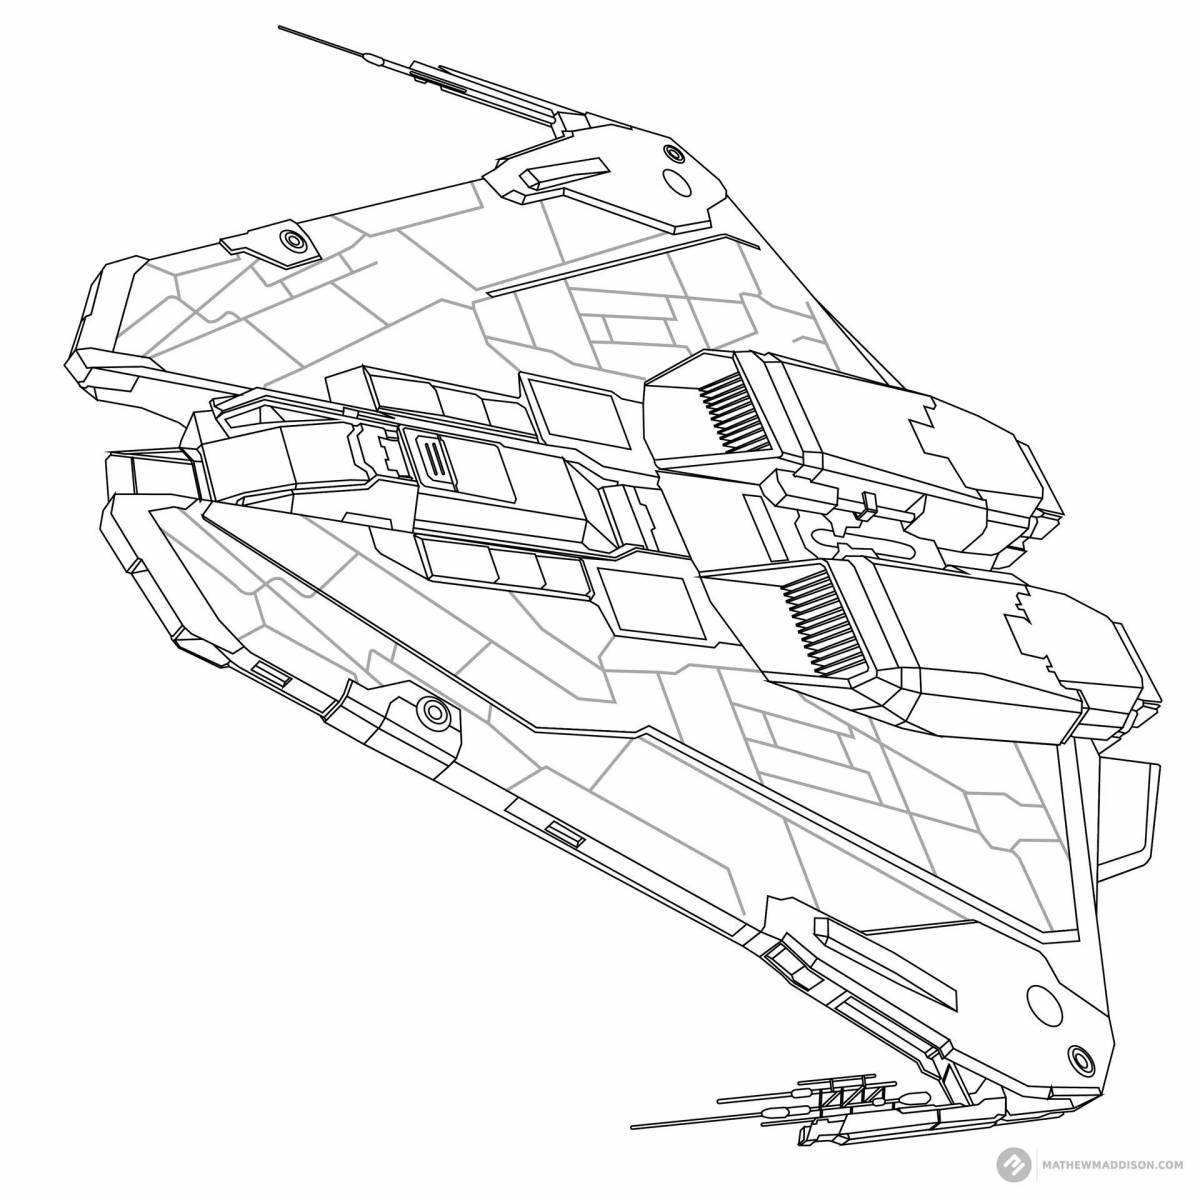 Flawless Starship coloring page